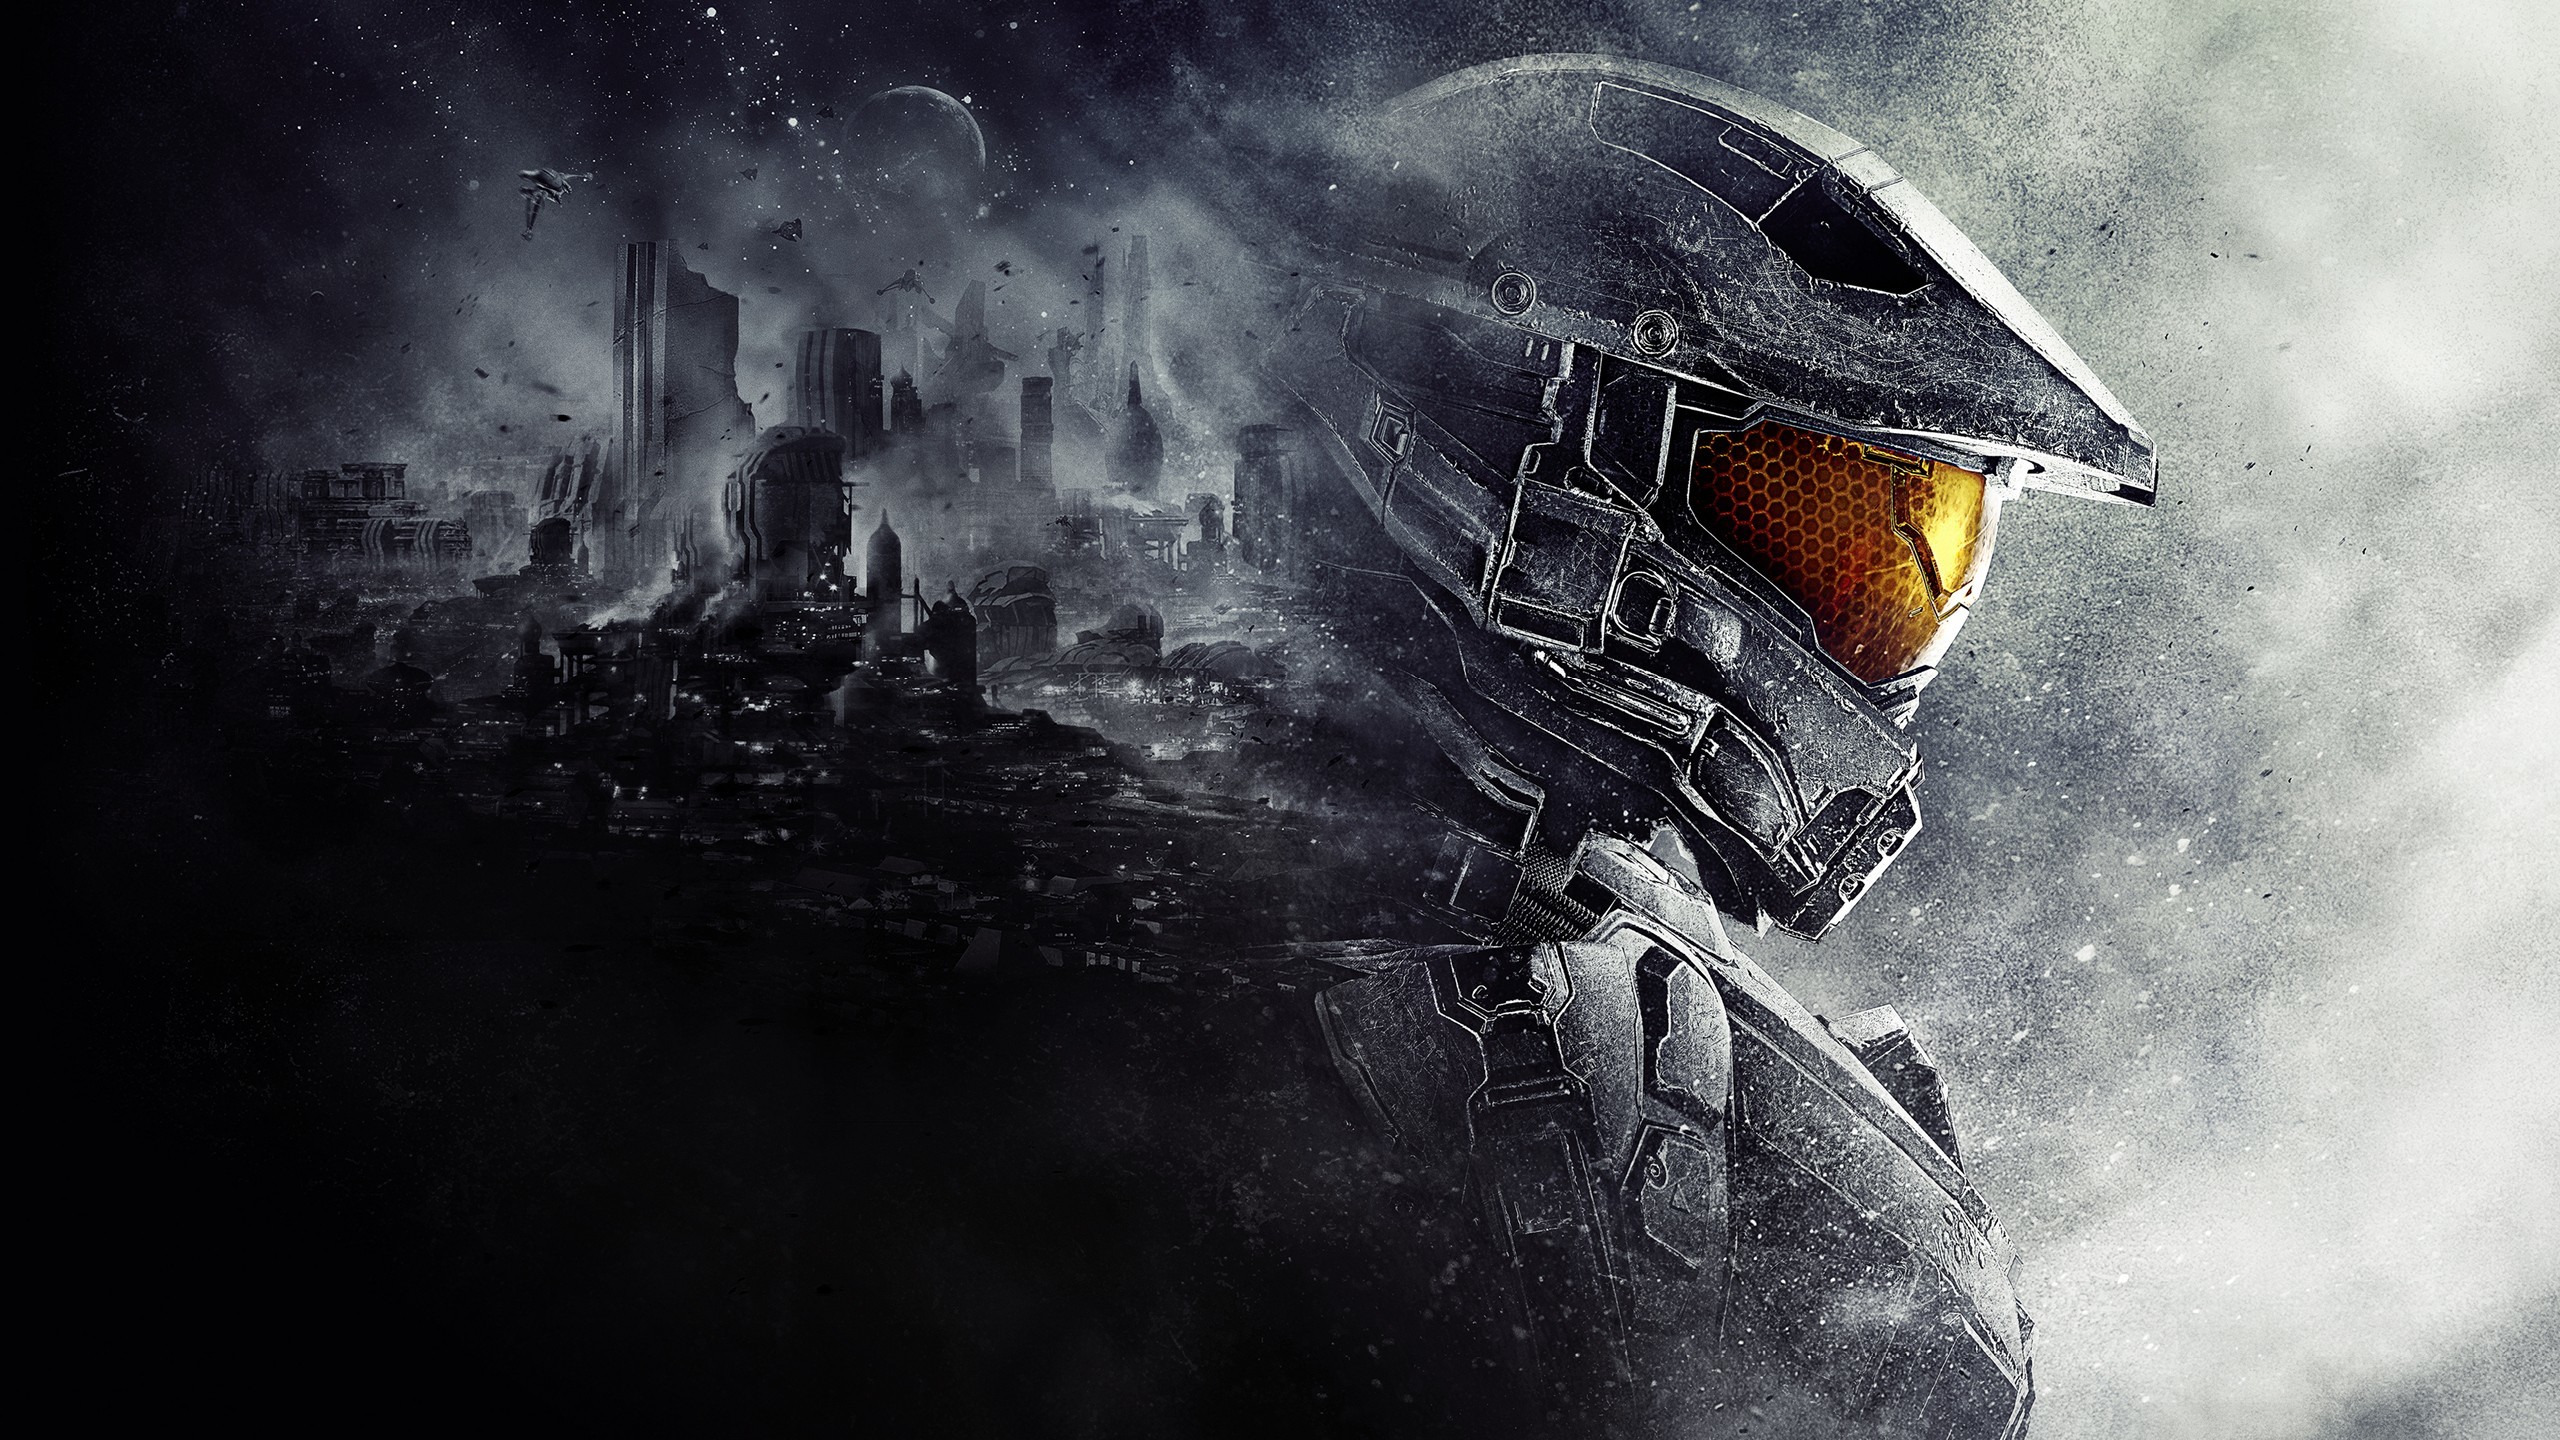 2560x1440 Master Chief Halo 5 Guardians wallpapers (54 Wallpapers)